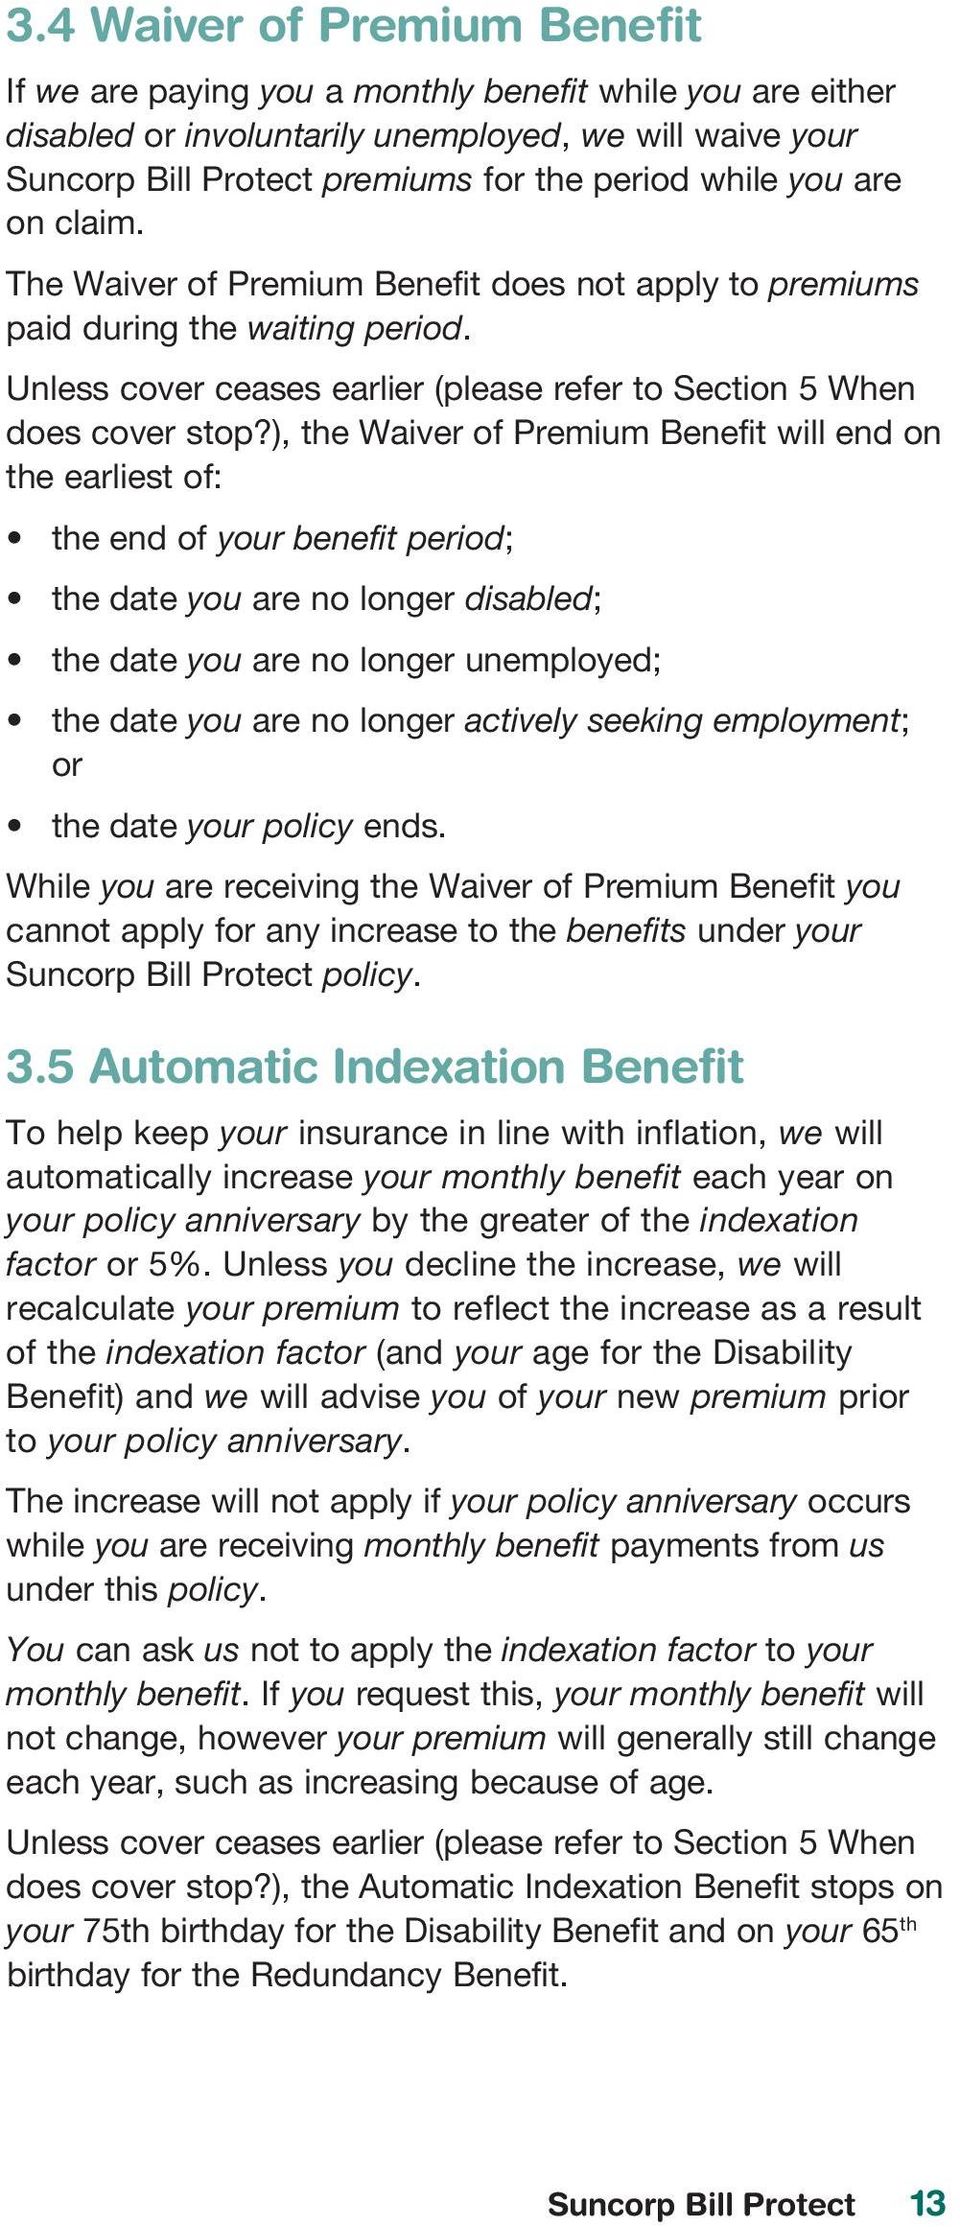 ), the Waiver of Premium Benefit will end on the earliest of: the end of your benefit period; the date you are no longer disabled; the date you are no longer unemployed; the date you are no longer